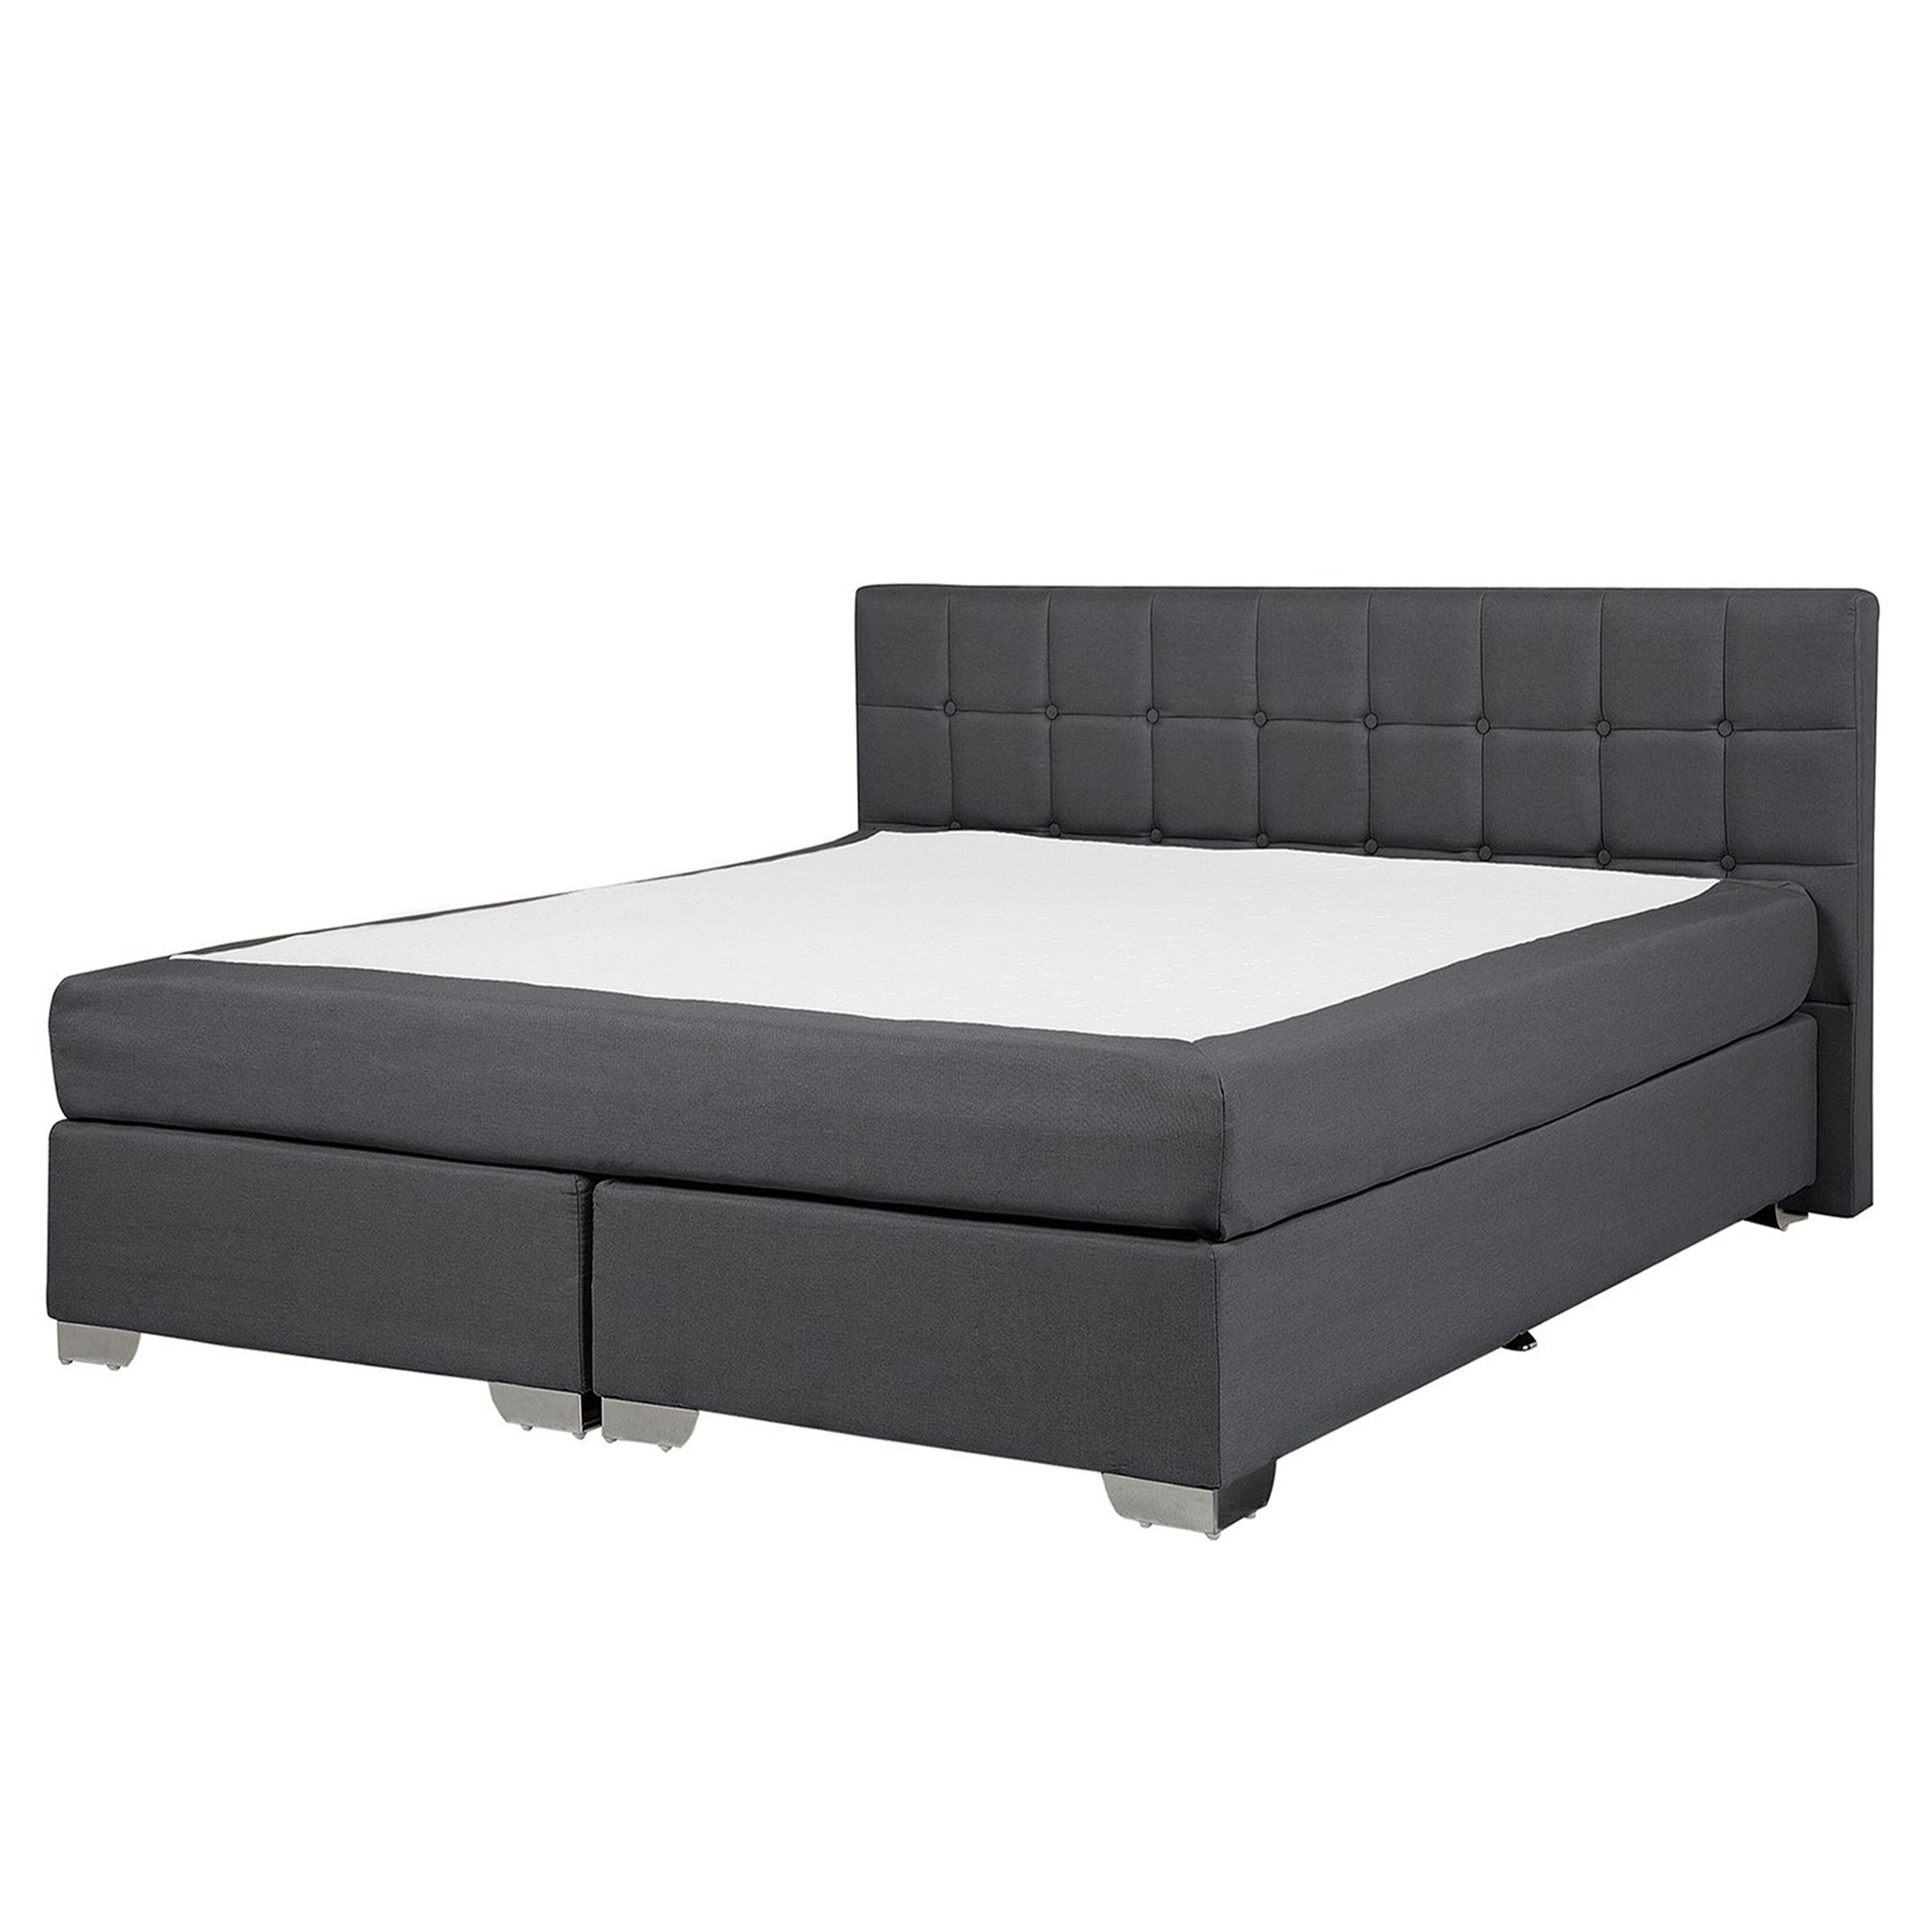 Beliani EU King Size Divan Bed Black Fabric Upholstered 5ft3 Frame with Tufted Headboard and Mattress